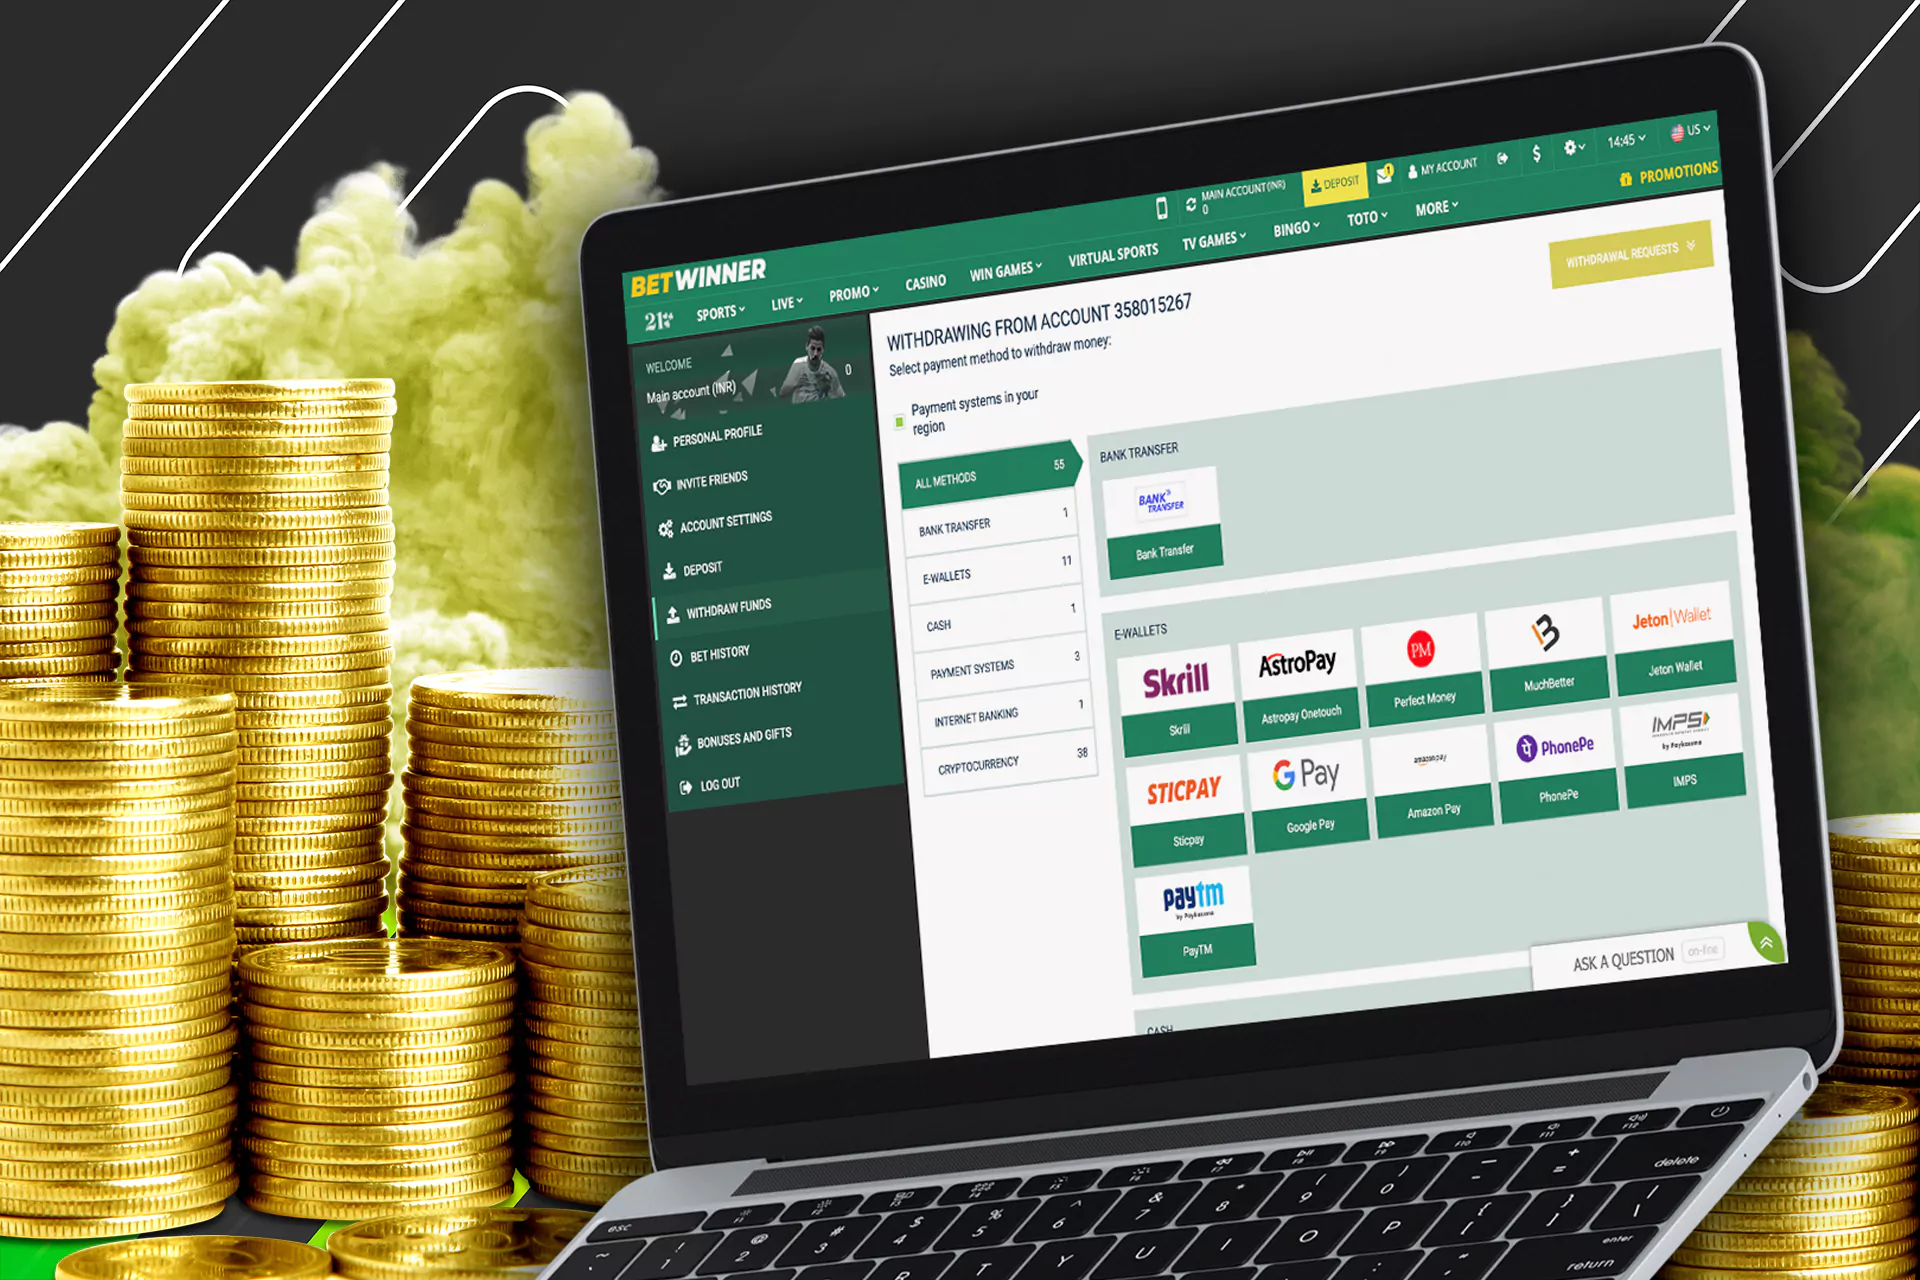 You can withdraw money from Betwinner the same way you've deposited it.